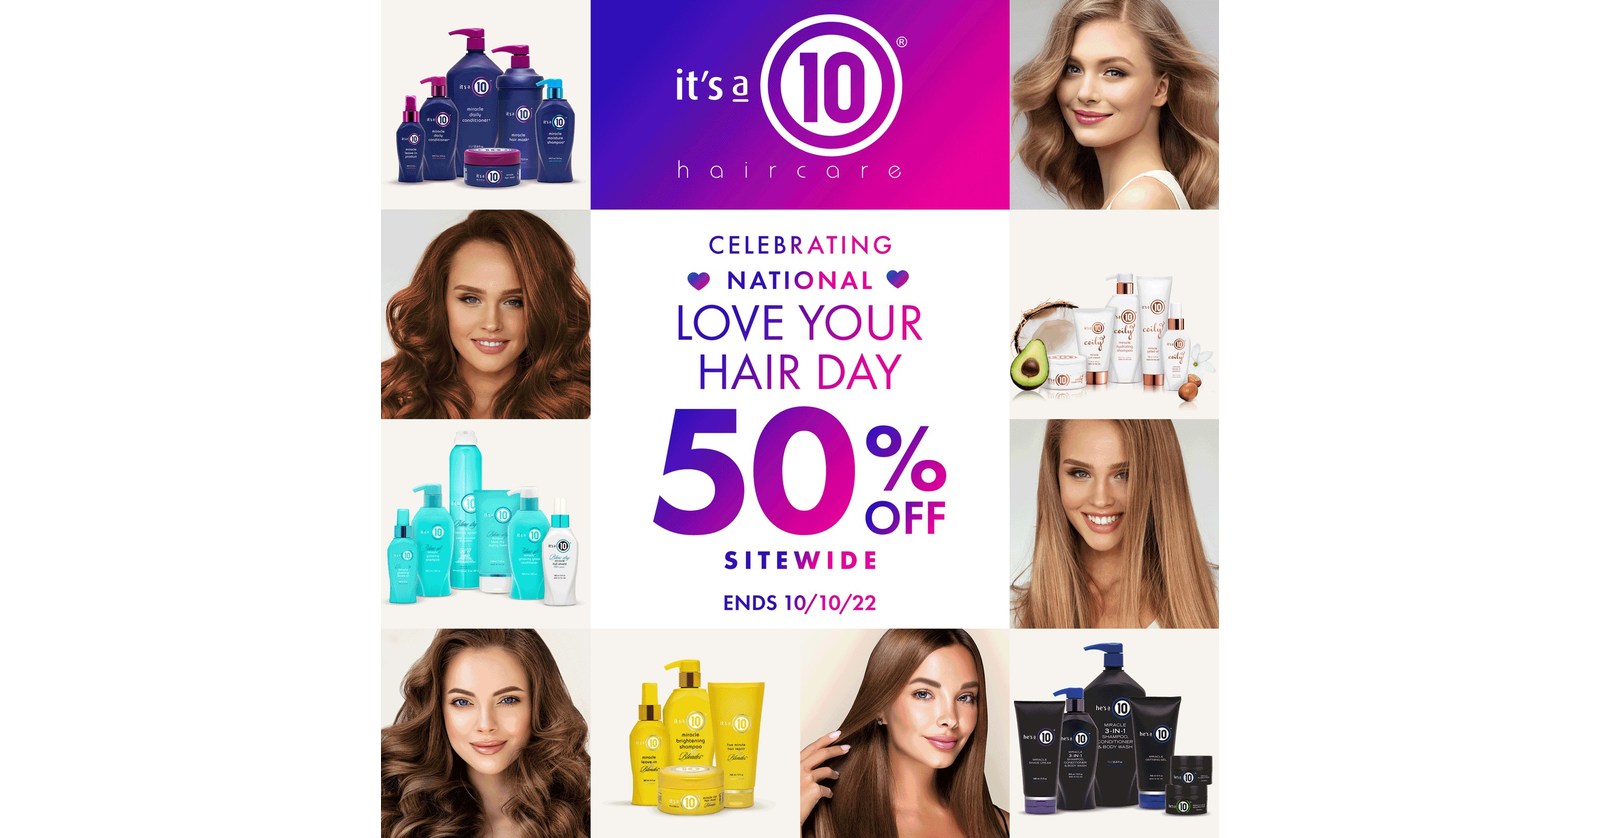 It’s A 10 Haircare Celebrates 6th Annual National Love Your Hair Day With 50% Off Sitewide and a Chance for 10 Lucky Loyalists to Win a 1-Year Supply of Miracle Leave-In